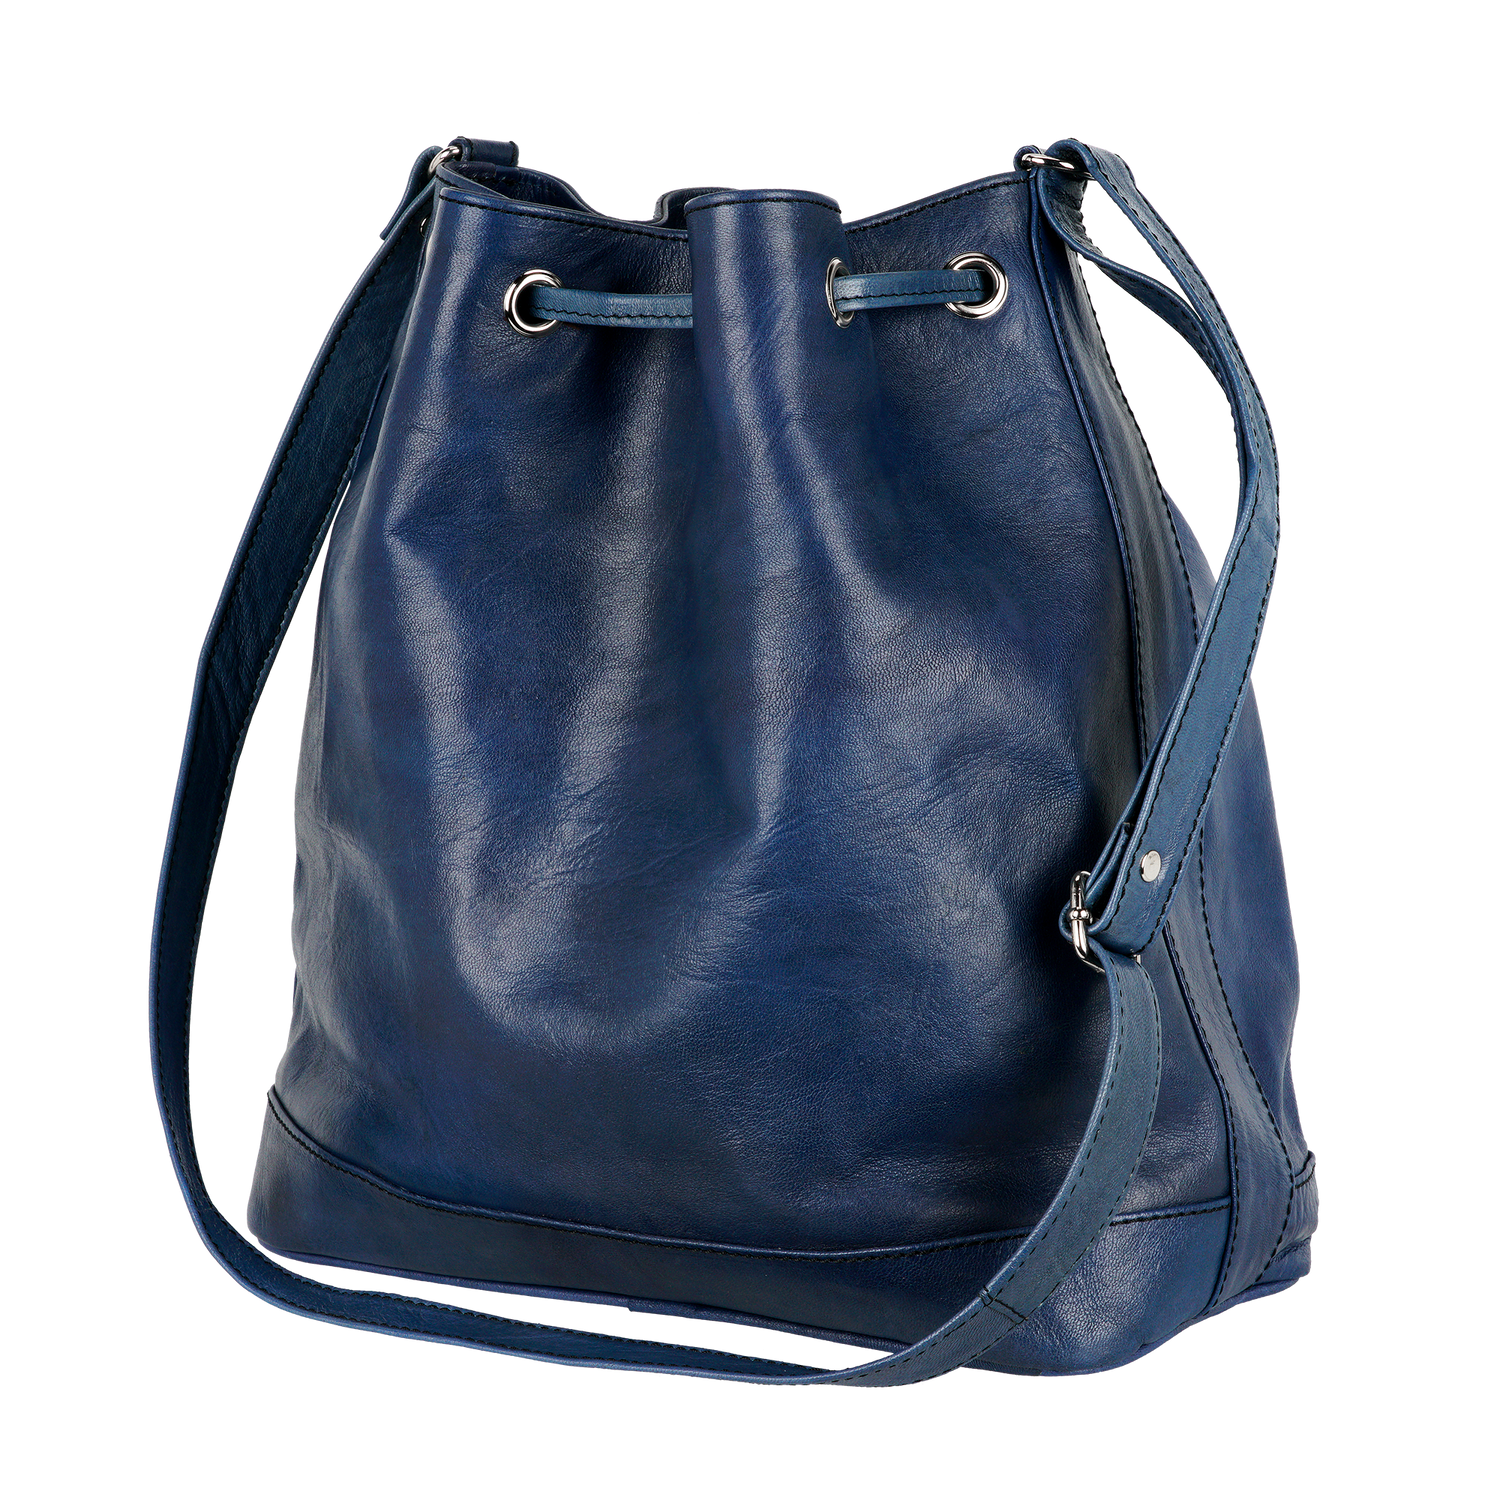 Blue Indigo beauty: Adorned in a captivating shade of blue indigo, this bag captures the essence of Moroccan aesthetics and adds a touch of enchanting allure.